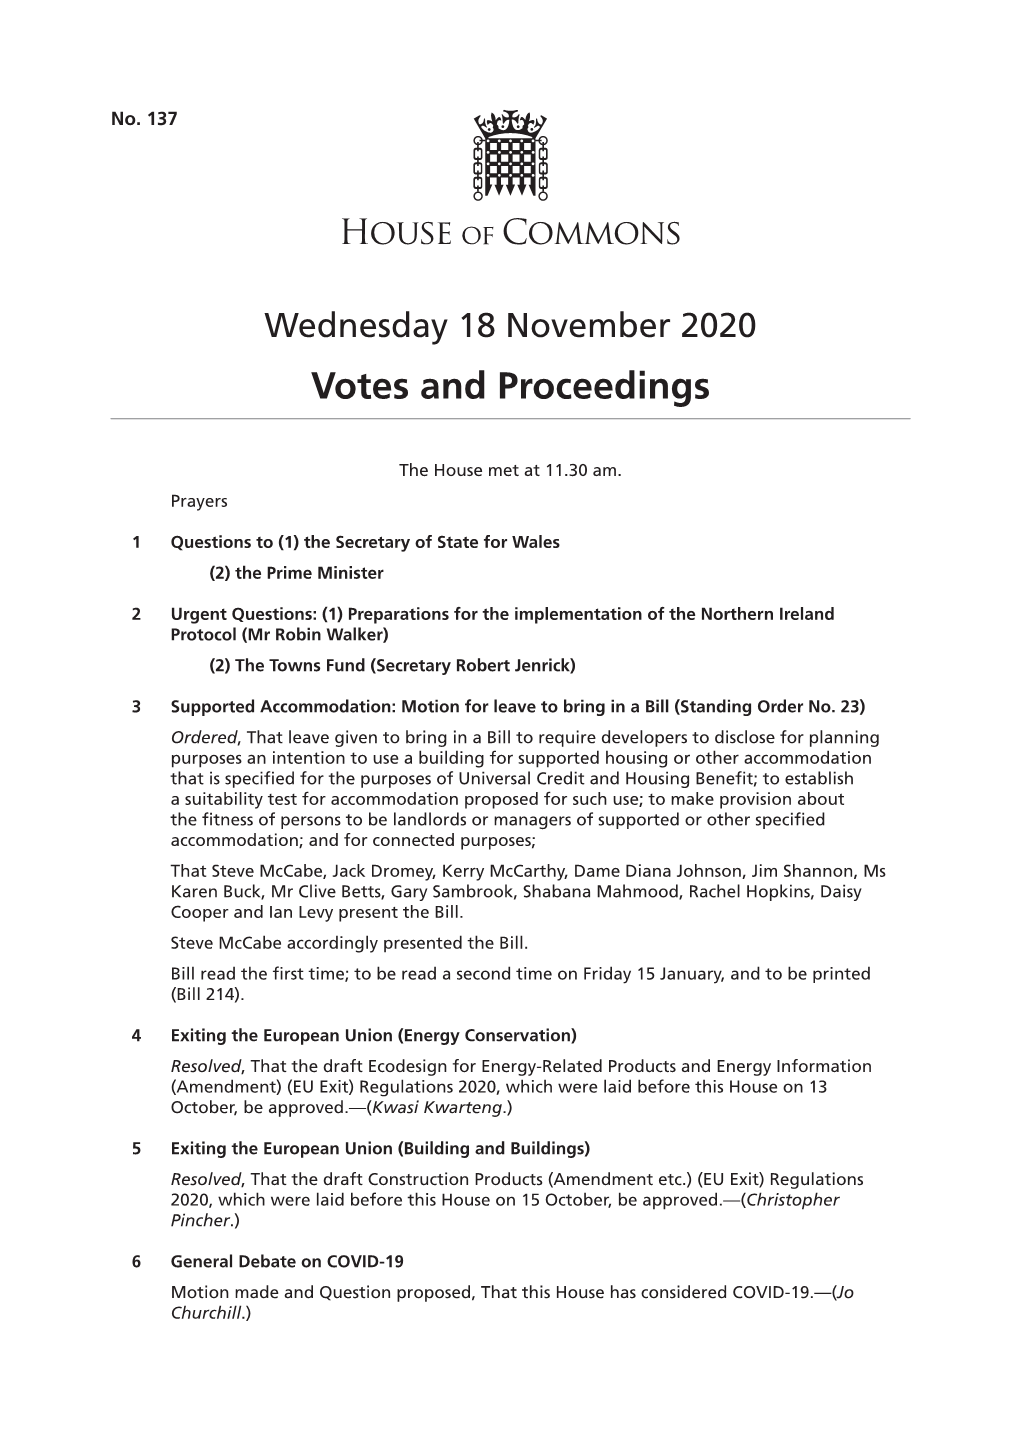 Votes and Proceedings for 18 Nov 2020